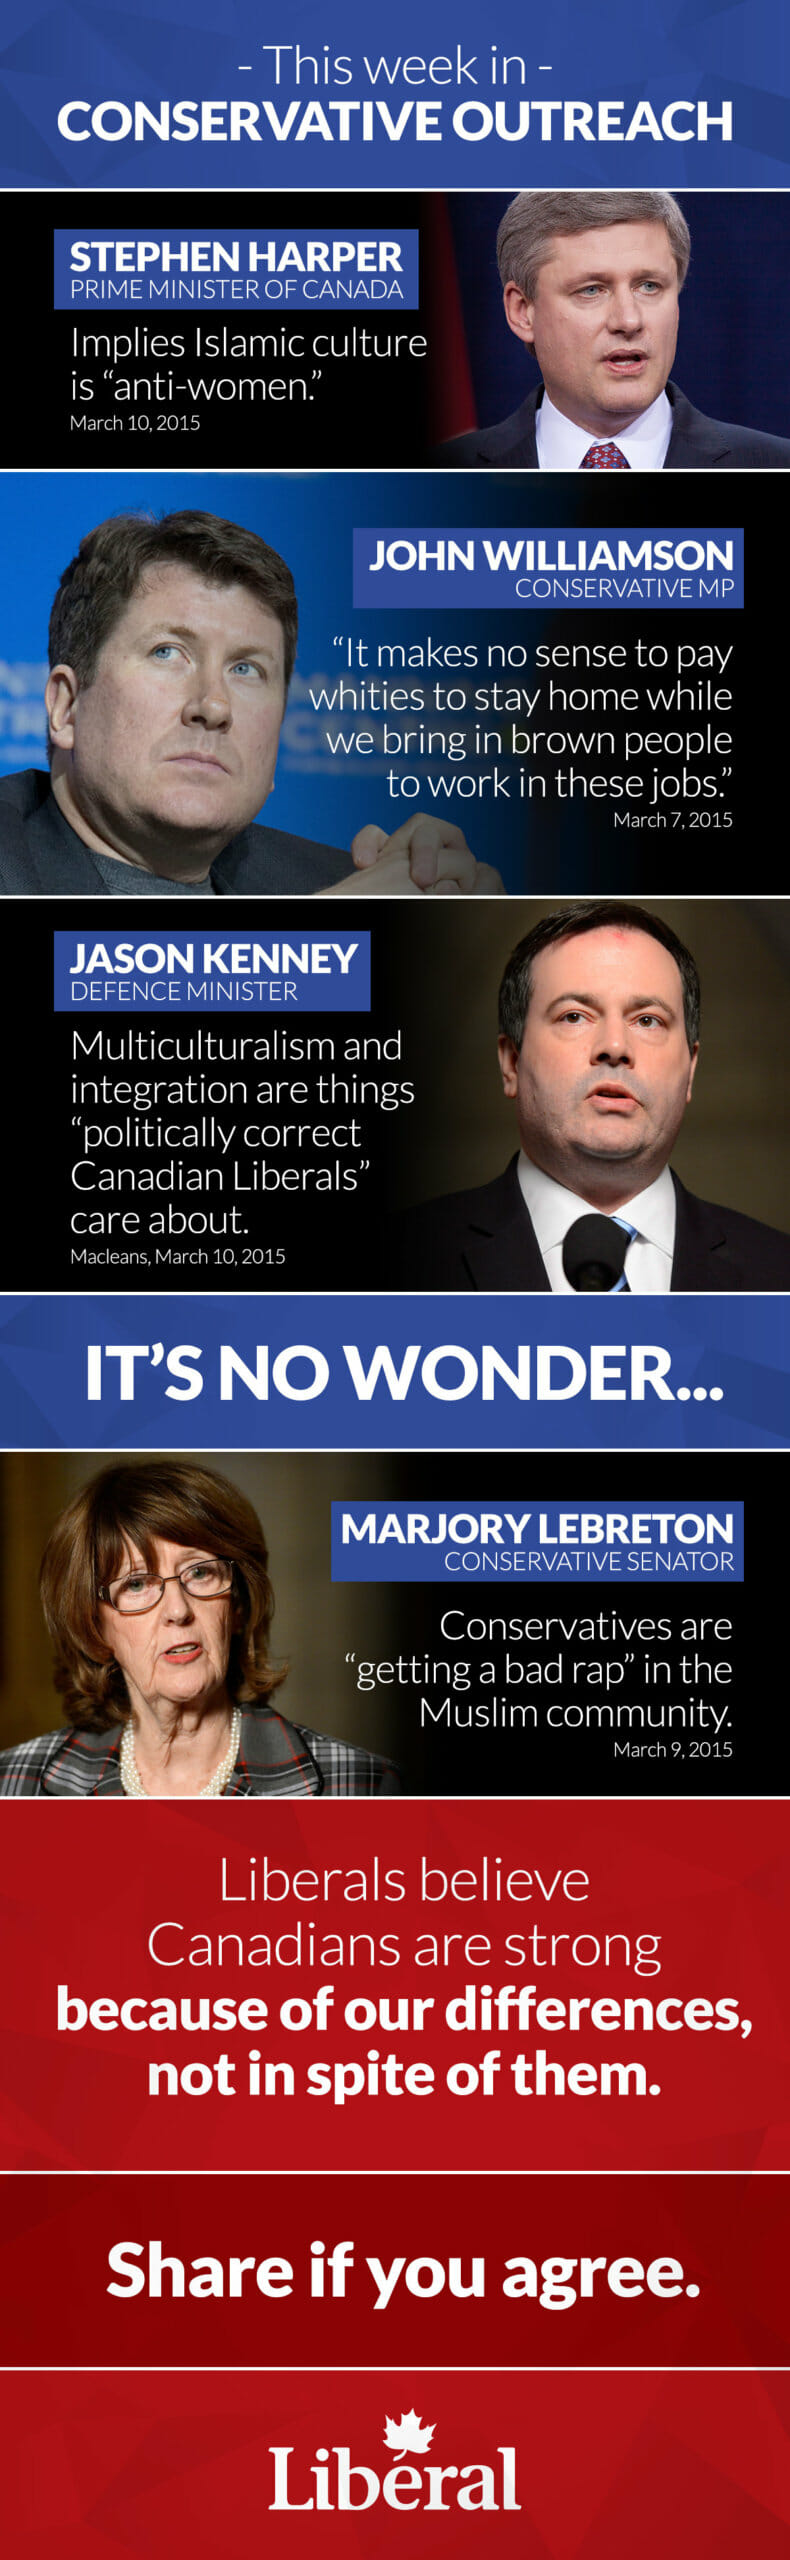 This week in Conservative outreach [Stephen Harper, Prime Minister of Canada] Islamic culture is “anti-women.” -- [John Williamson, Conservative MP] “It makes no sense to pay whities to stay home while we bring in brown people to work in these jobs.”  -- [Jason Kenney, Defence Minister] Multiculturalism and integration are things “politically correct Canadian Liberals” care about.  -- IT’S NO WONDER… [Marjory Lebreton, Conservative Senator] Conservatives are “getting a bad rap” in the Muslim community. -- Liberals believe Canadians are strong because of our differences, not in spite of them.  Share if you agree.